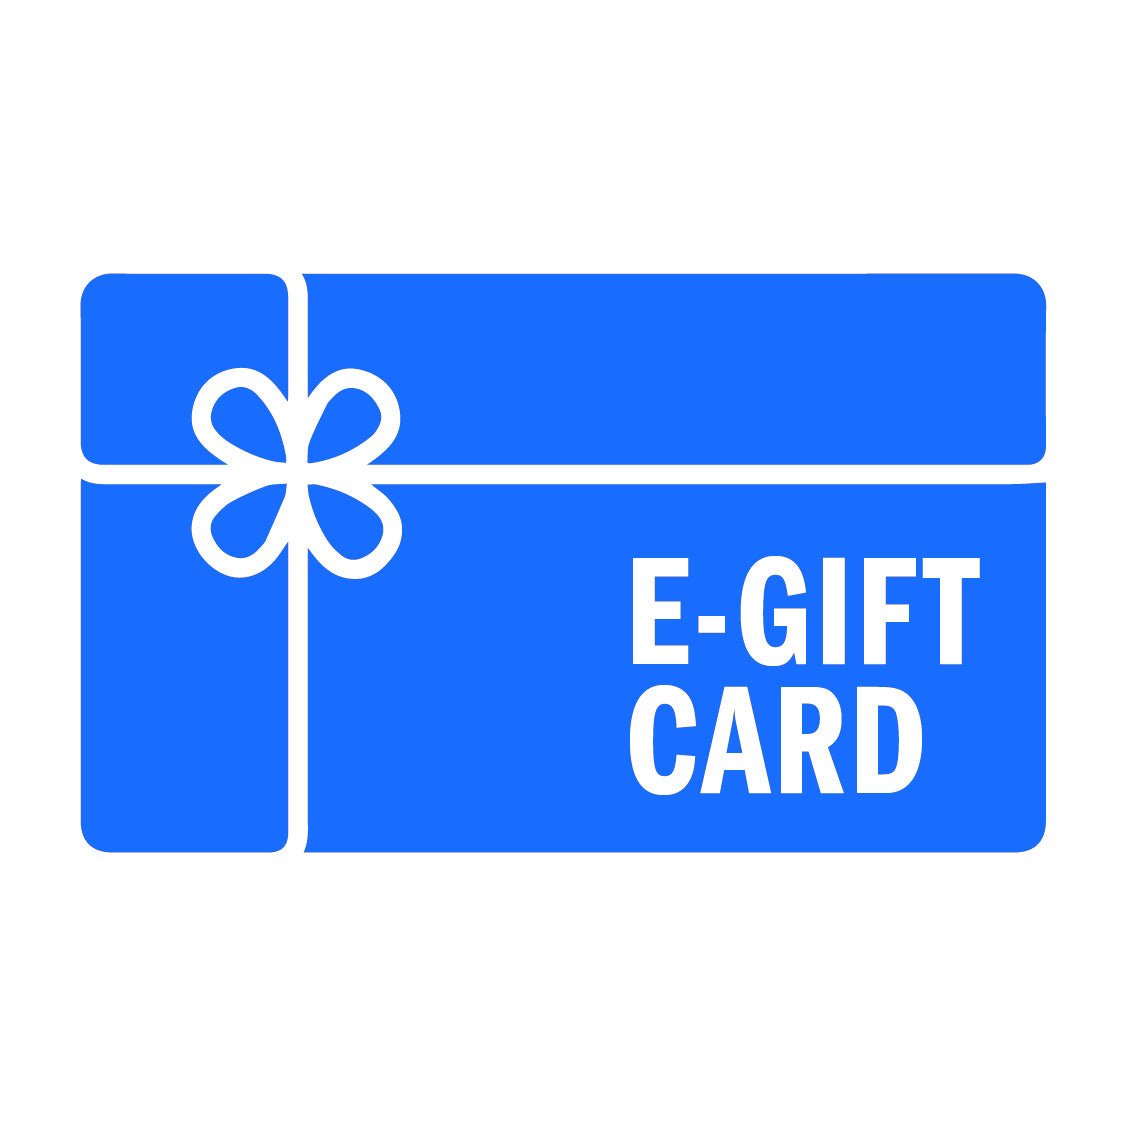 Tips for Buying The Best Gift Cards This Christmas